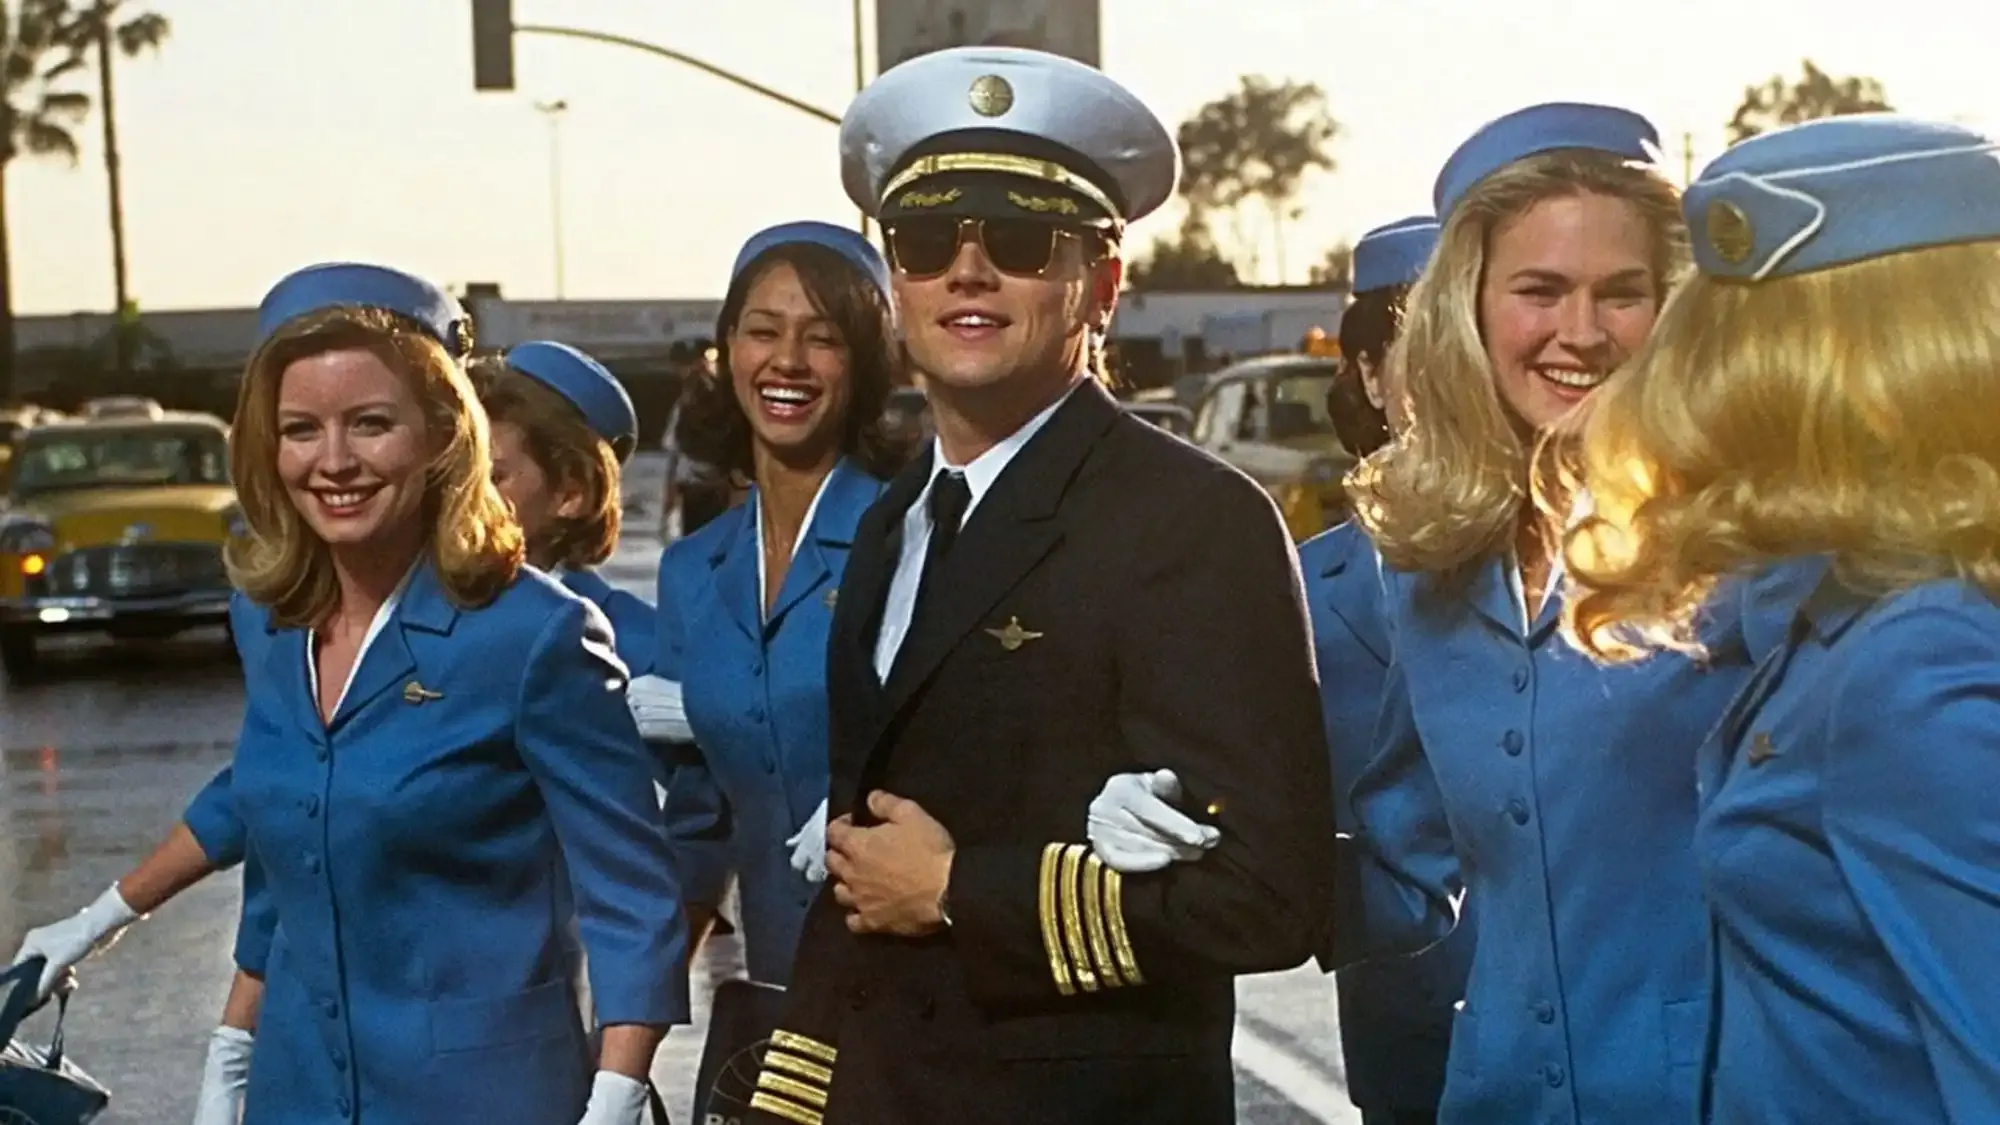 Catch Me If You Can movie review